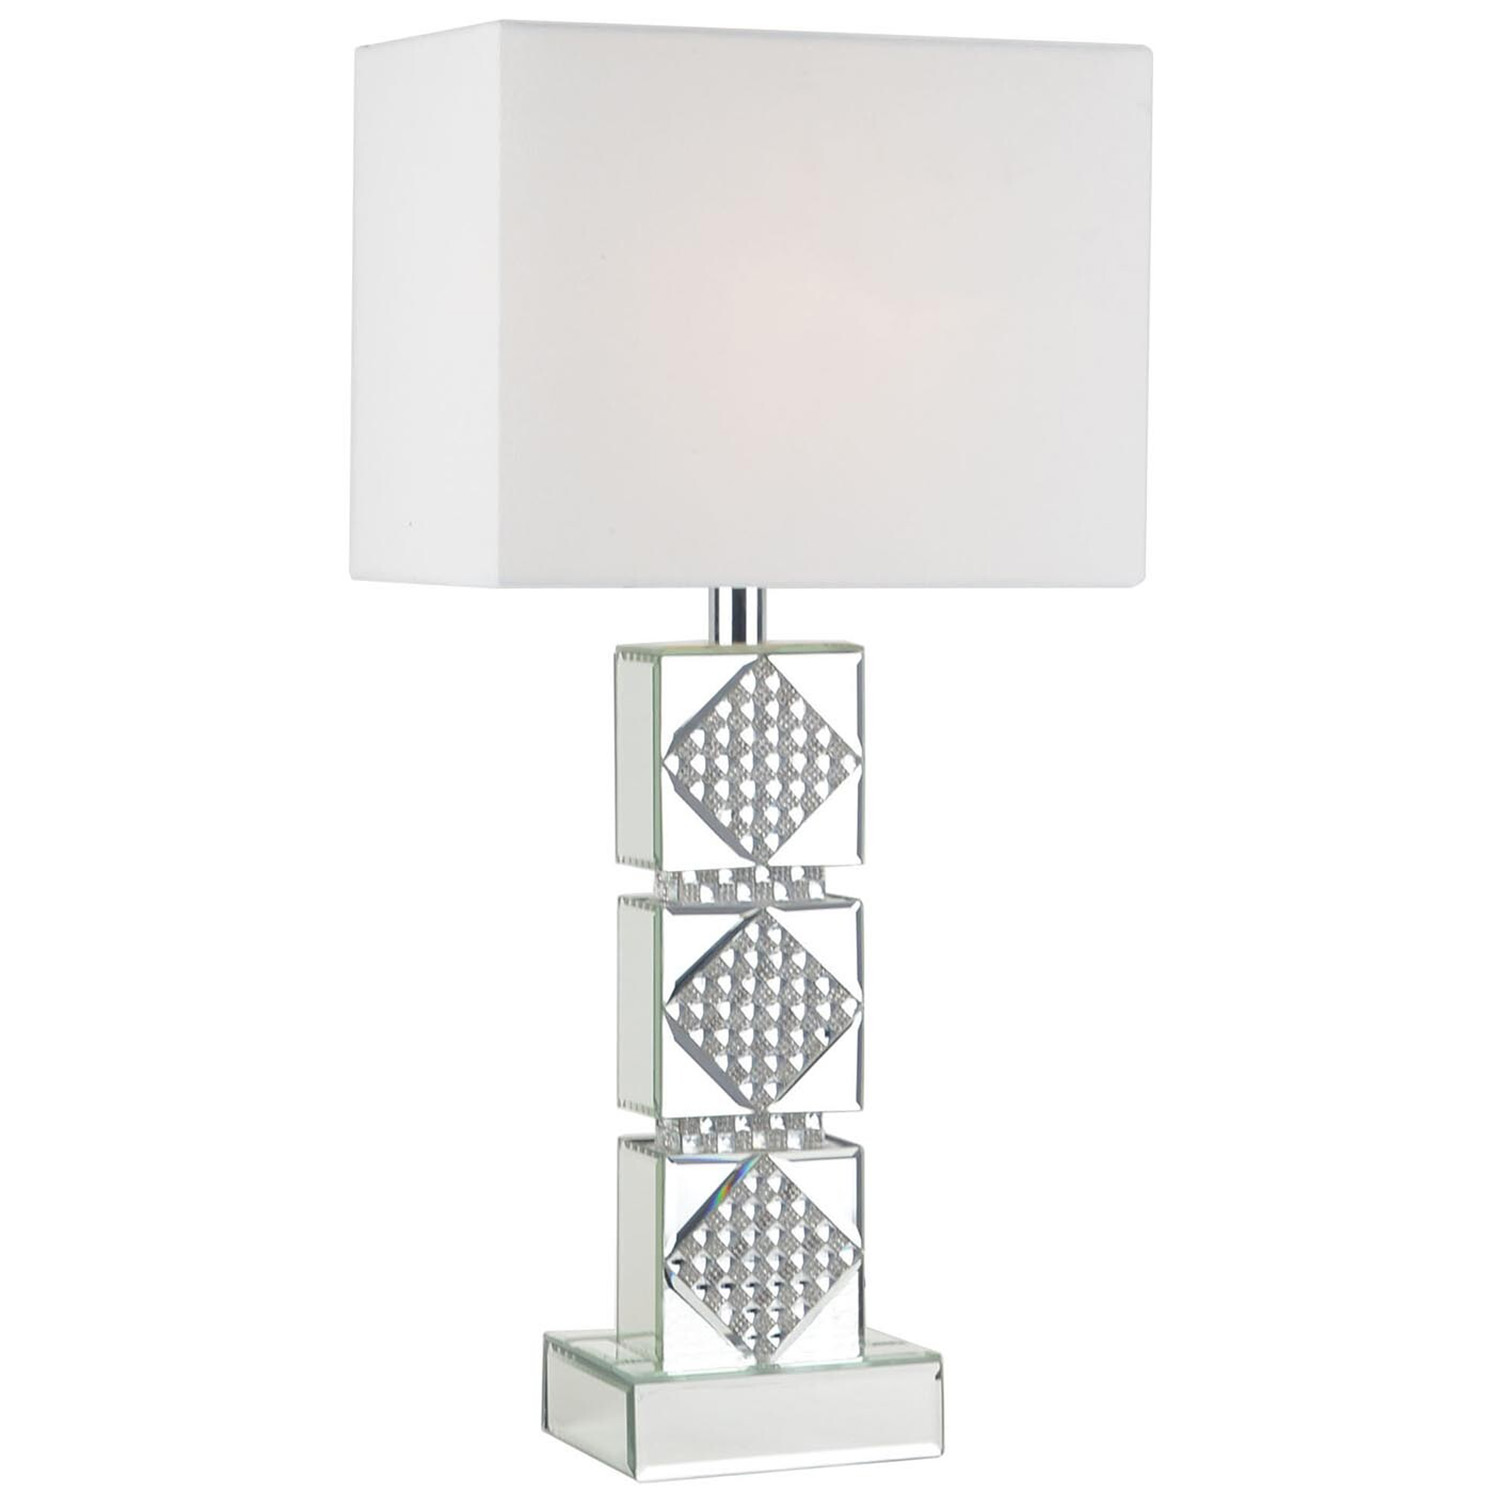 Boutique Collection Tallulah White Crystal Mirror Table Lamp Image 1